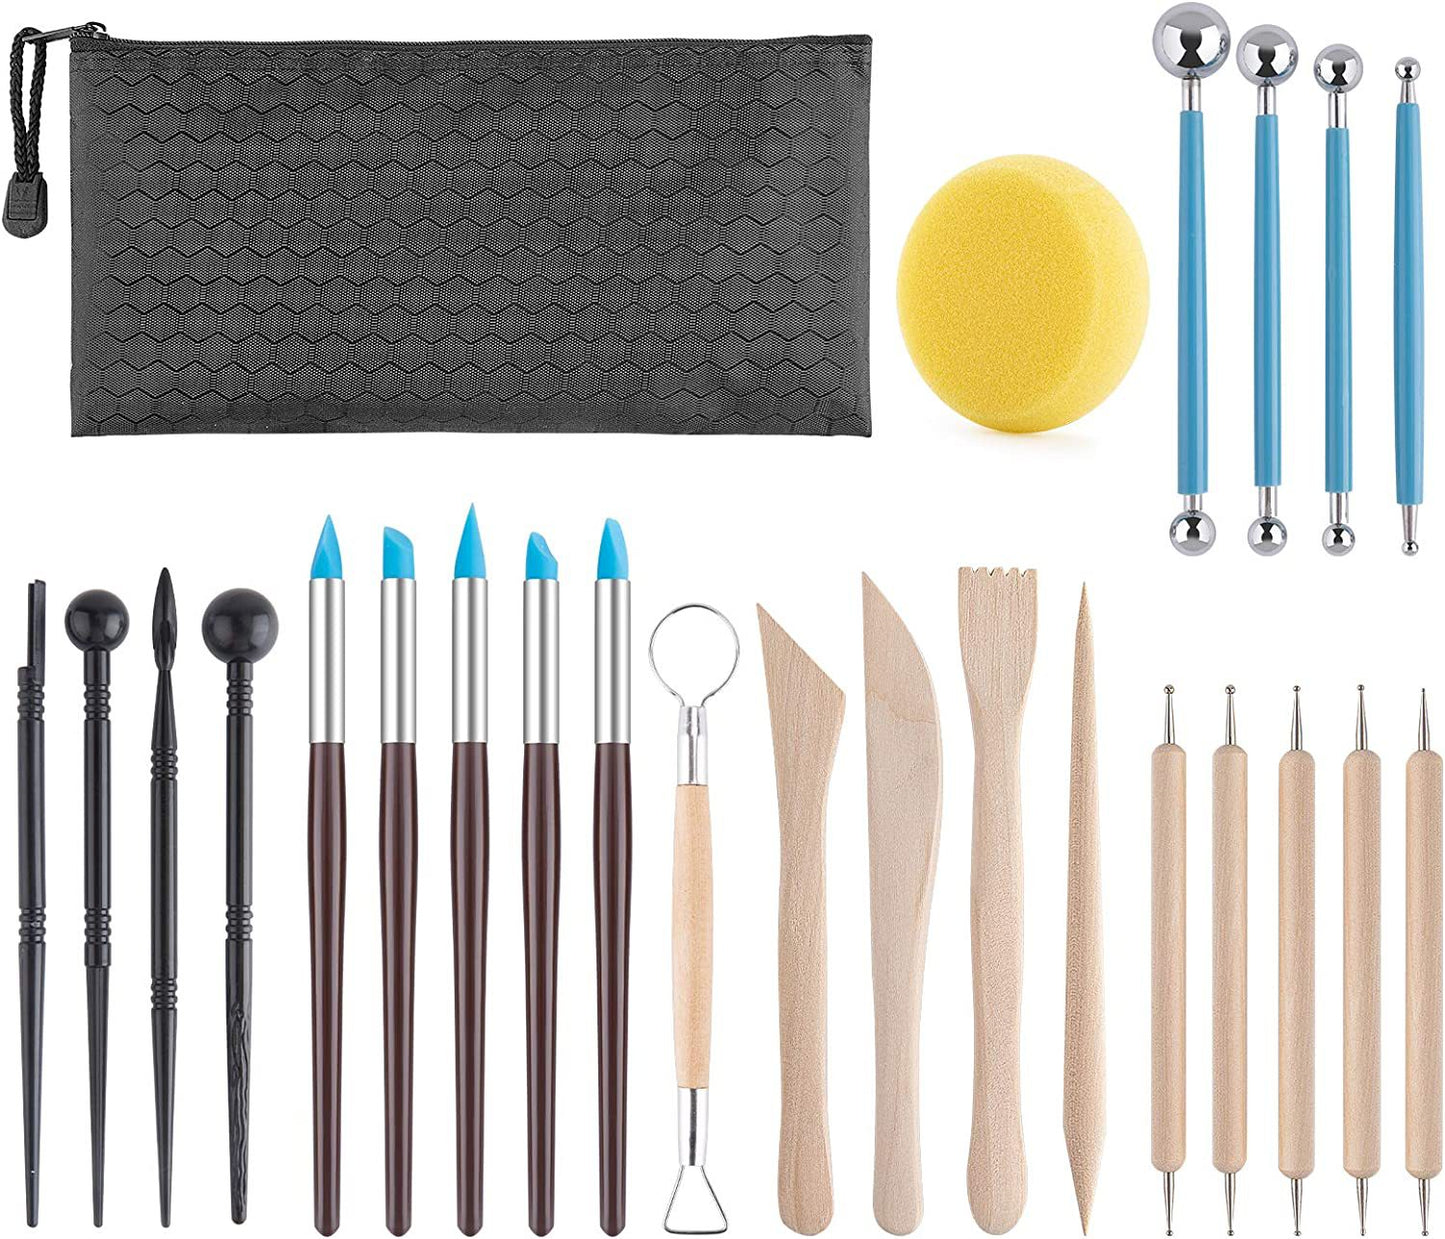 Pottery Clay Sculpting Tools Pottery Carving Tool Kit With Carrying Case Bag  For Beginners Professionals Pottery Modeling DIY